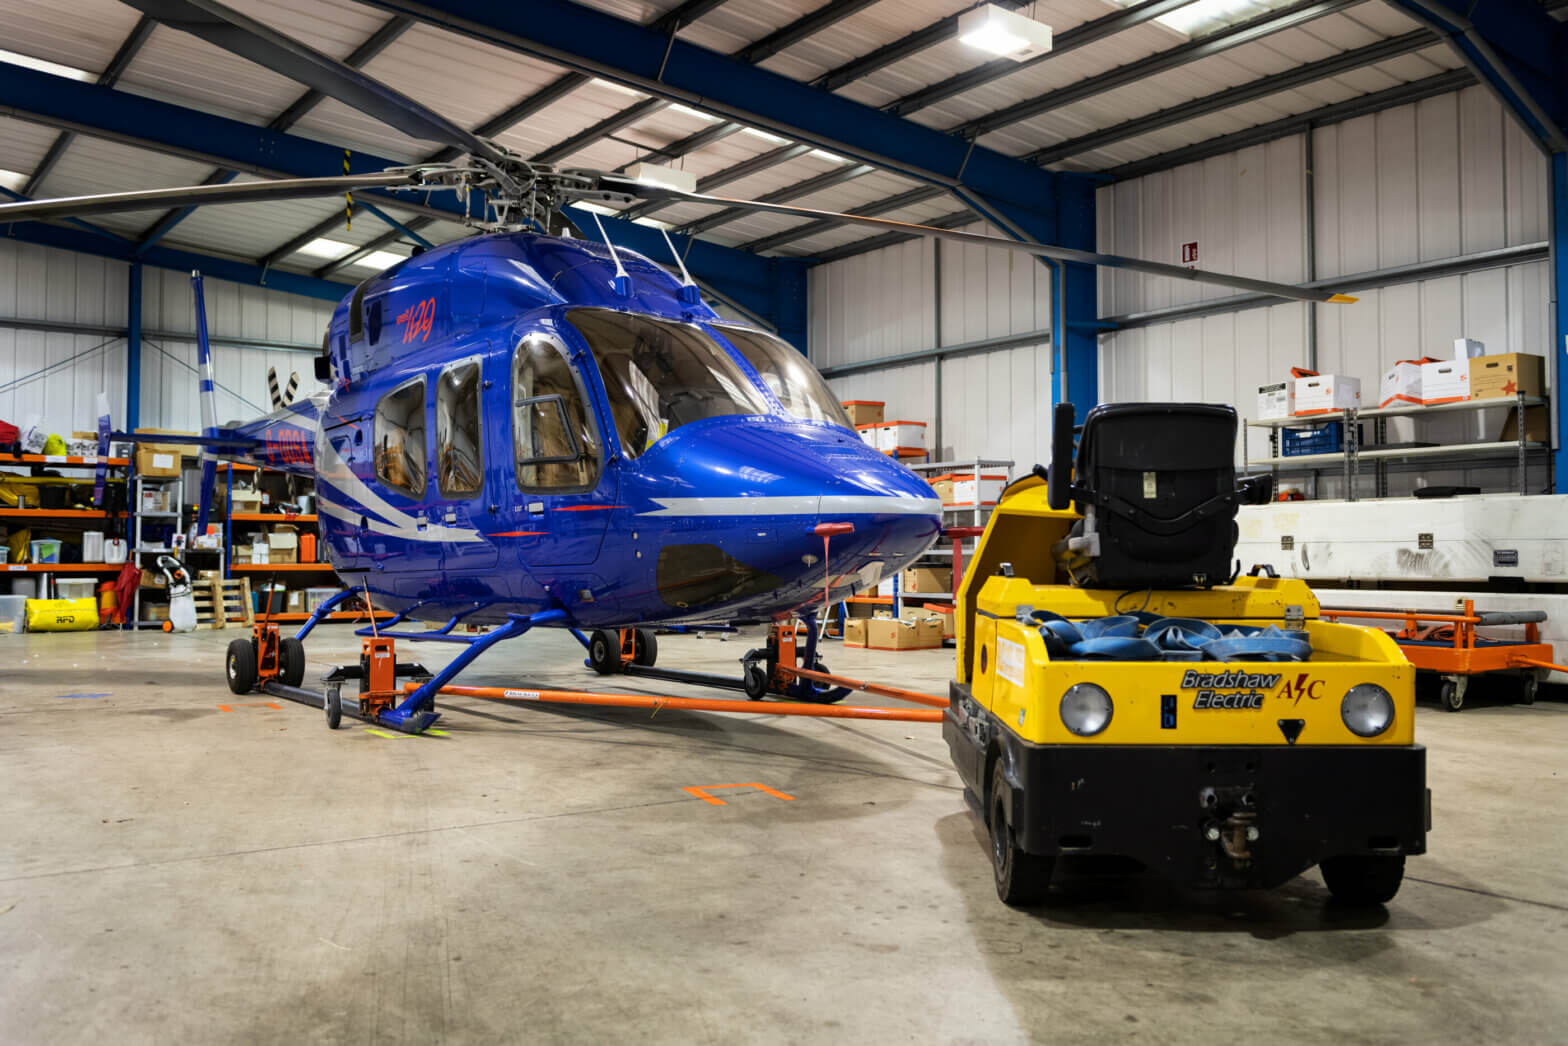 Starspeed marks 10 years with the Bell 429